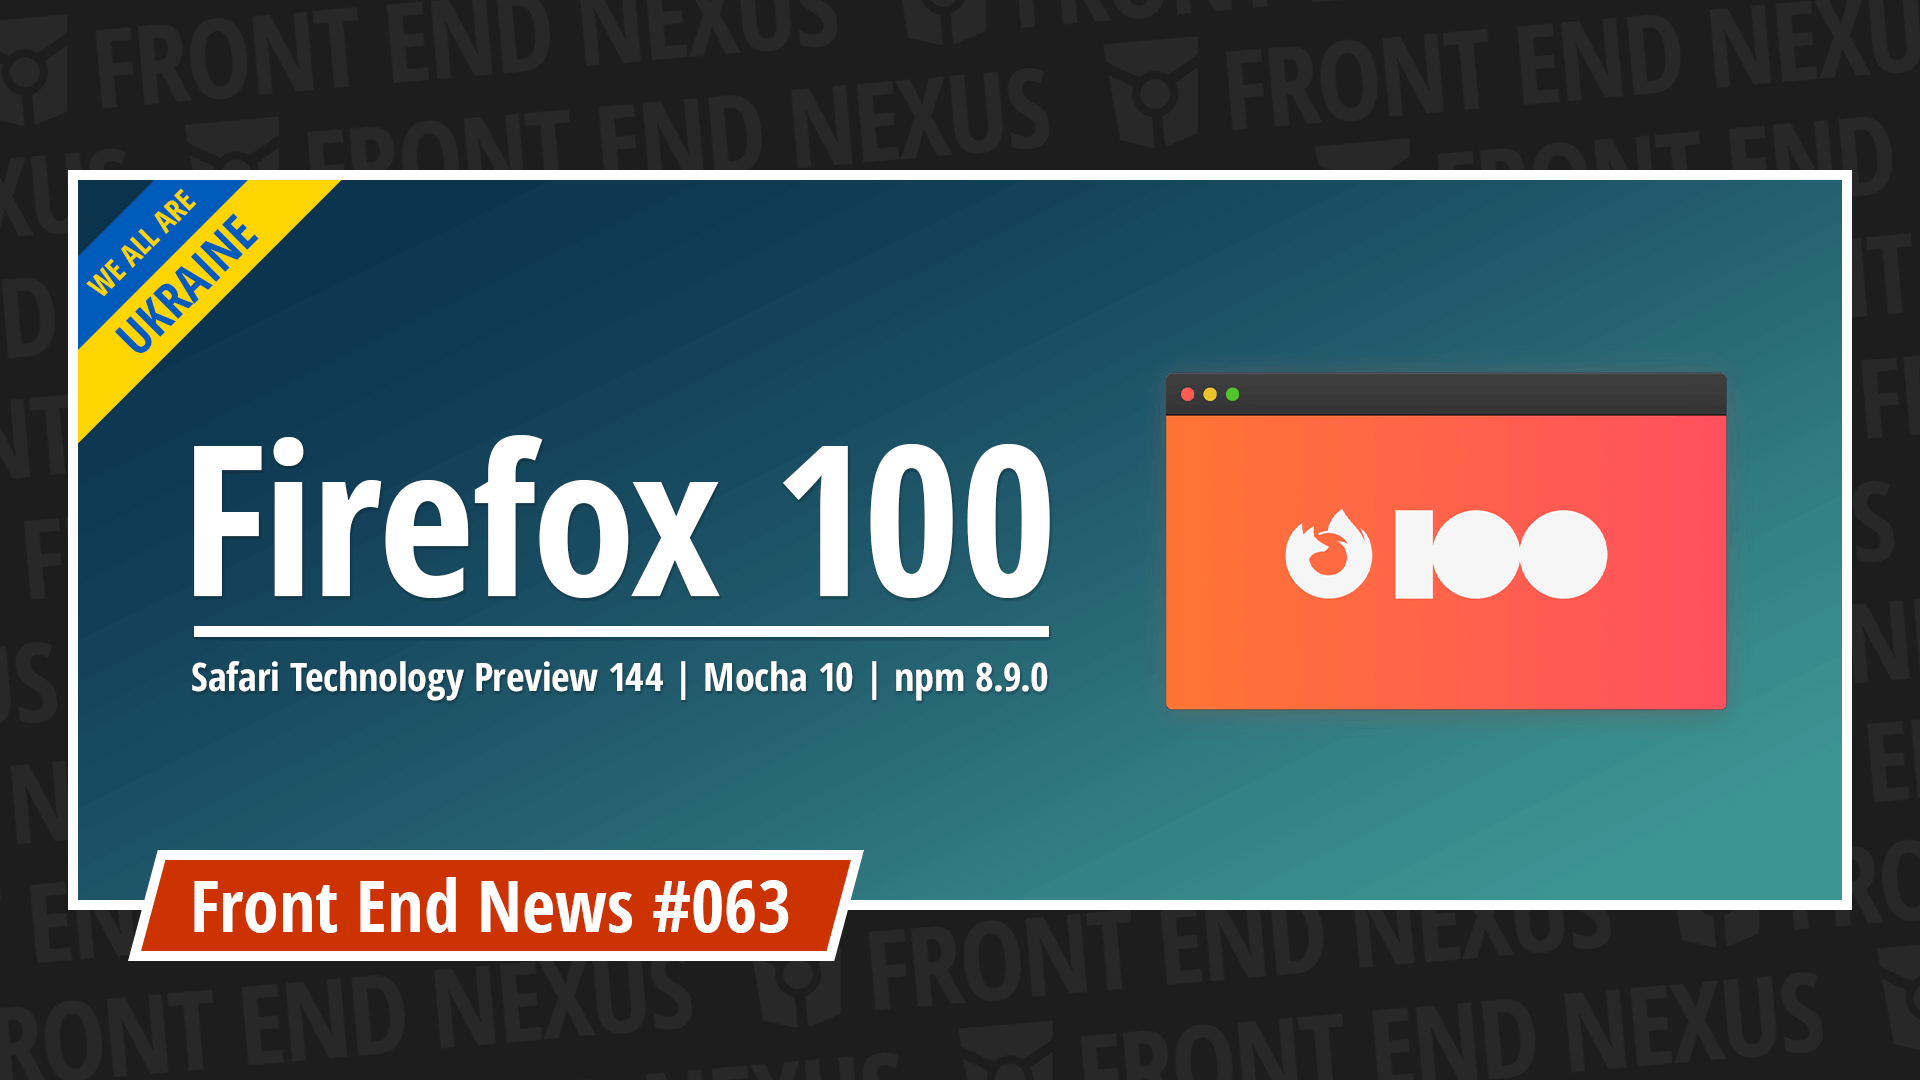 Celebrating Firefox 100, Safari Technology Preview 144, Mocha 10, npm 8.9.0, and more | Front End News #063